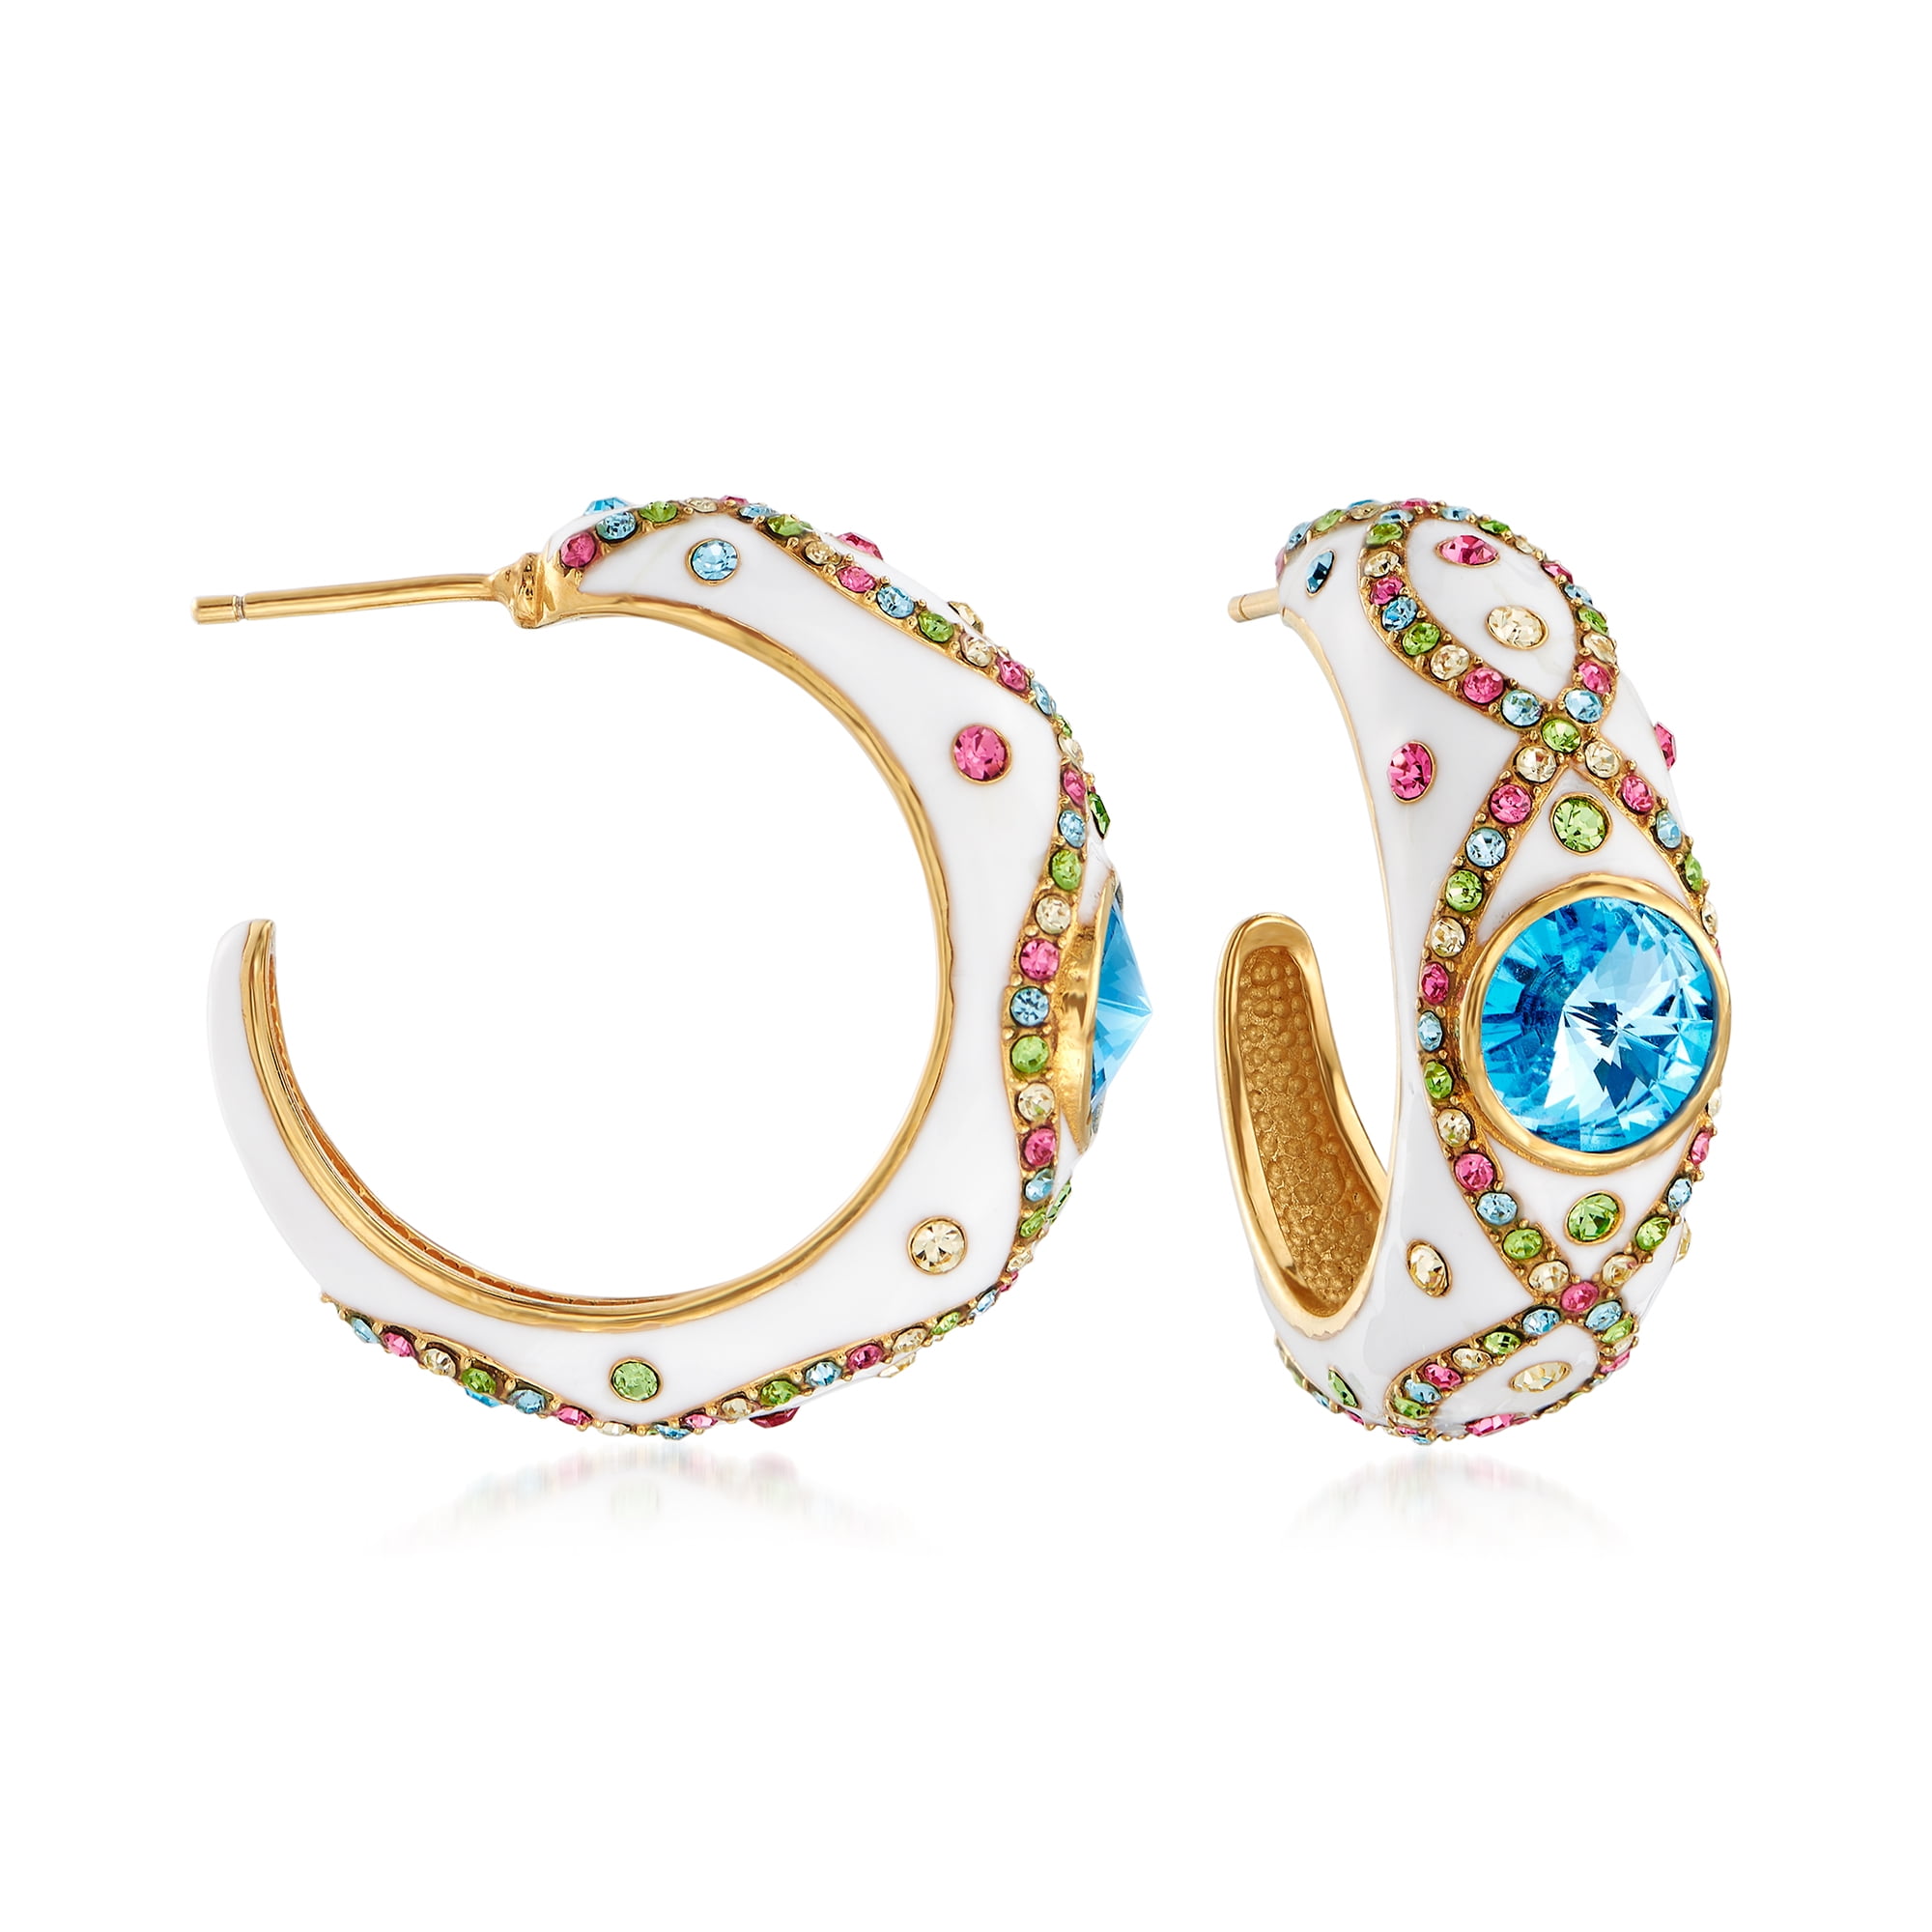 Ross-Simons Multicolored Crystal and Blue Swarovski Crystal Hoop Earrings  With White Enamel in 18kt Gold Over Sterling